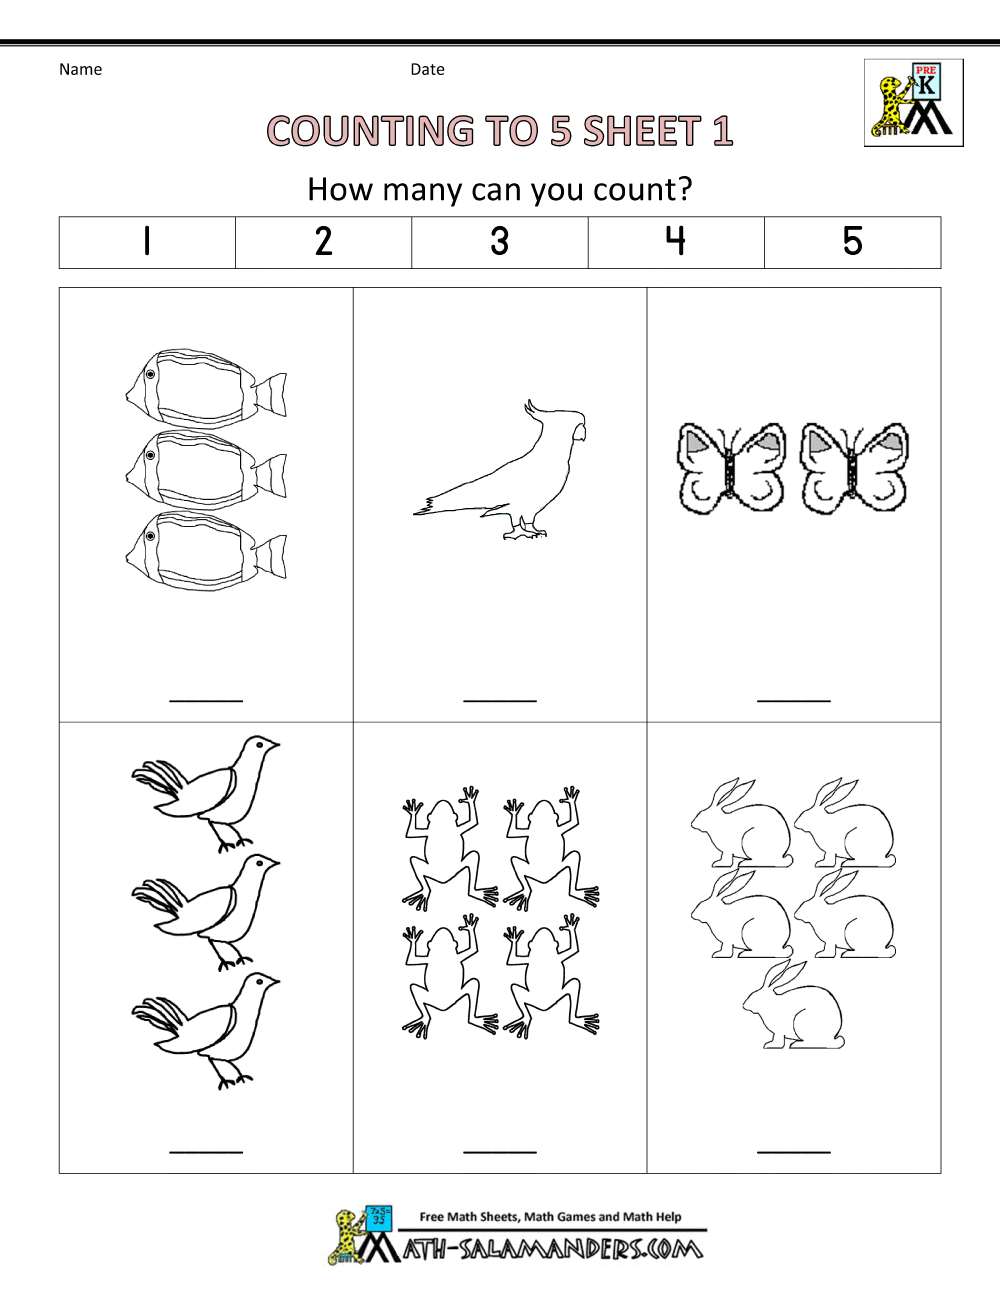 Preschool Counting Worksheets - Counting to 22 In Counting By 5s Worksheet